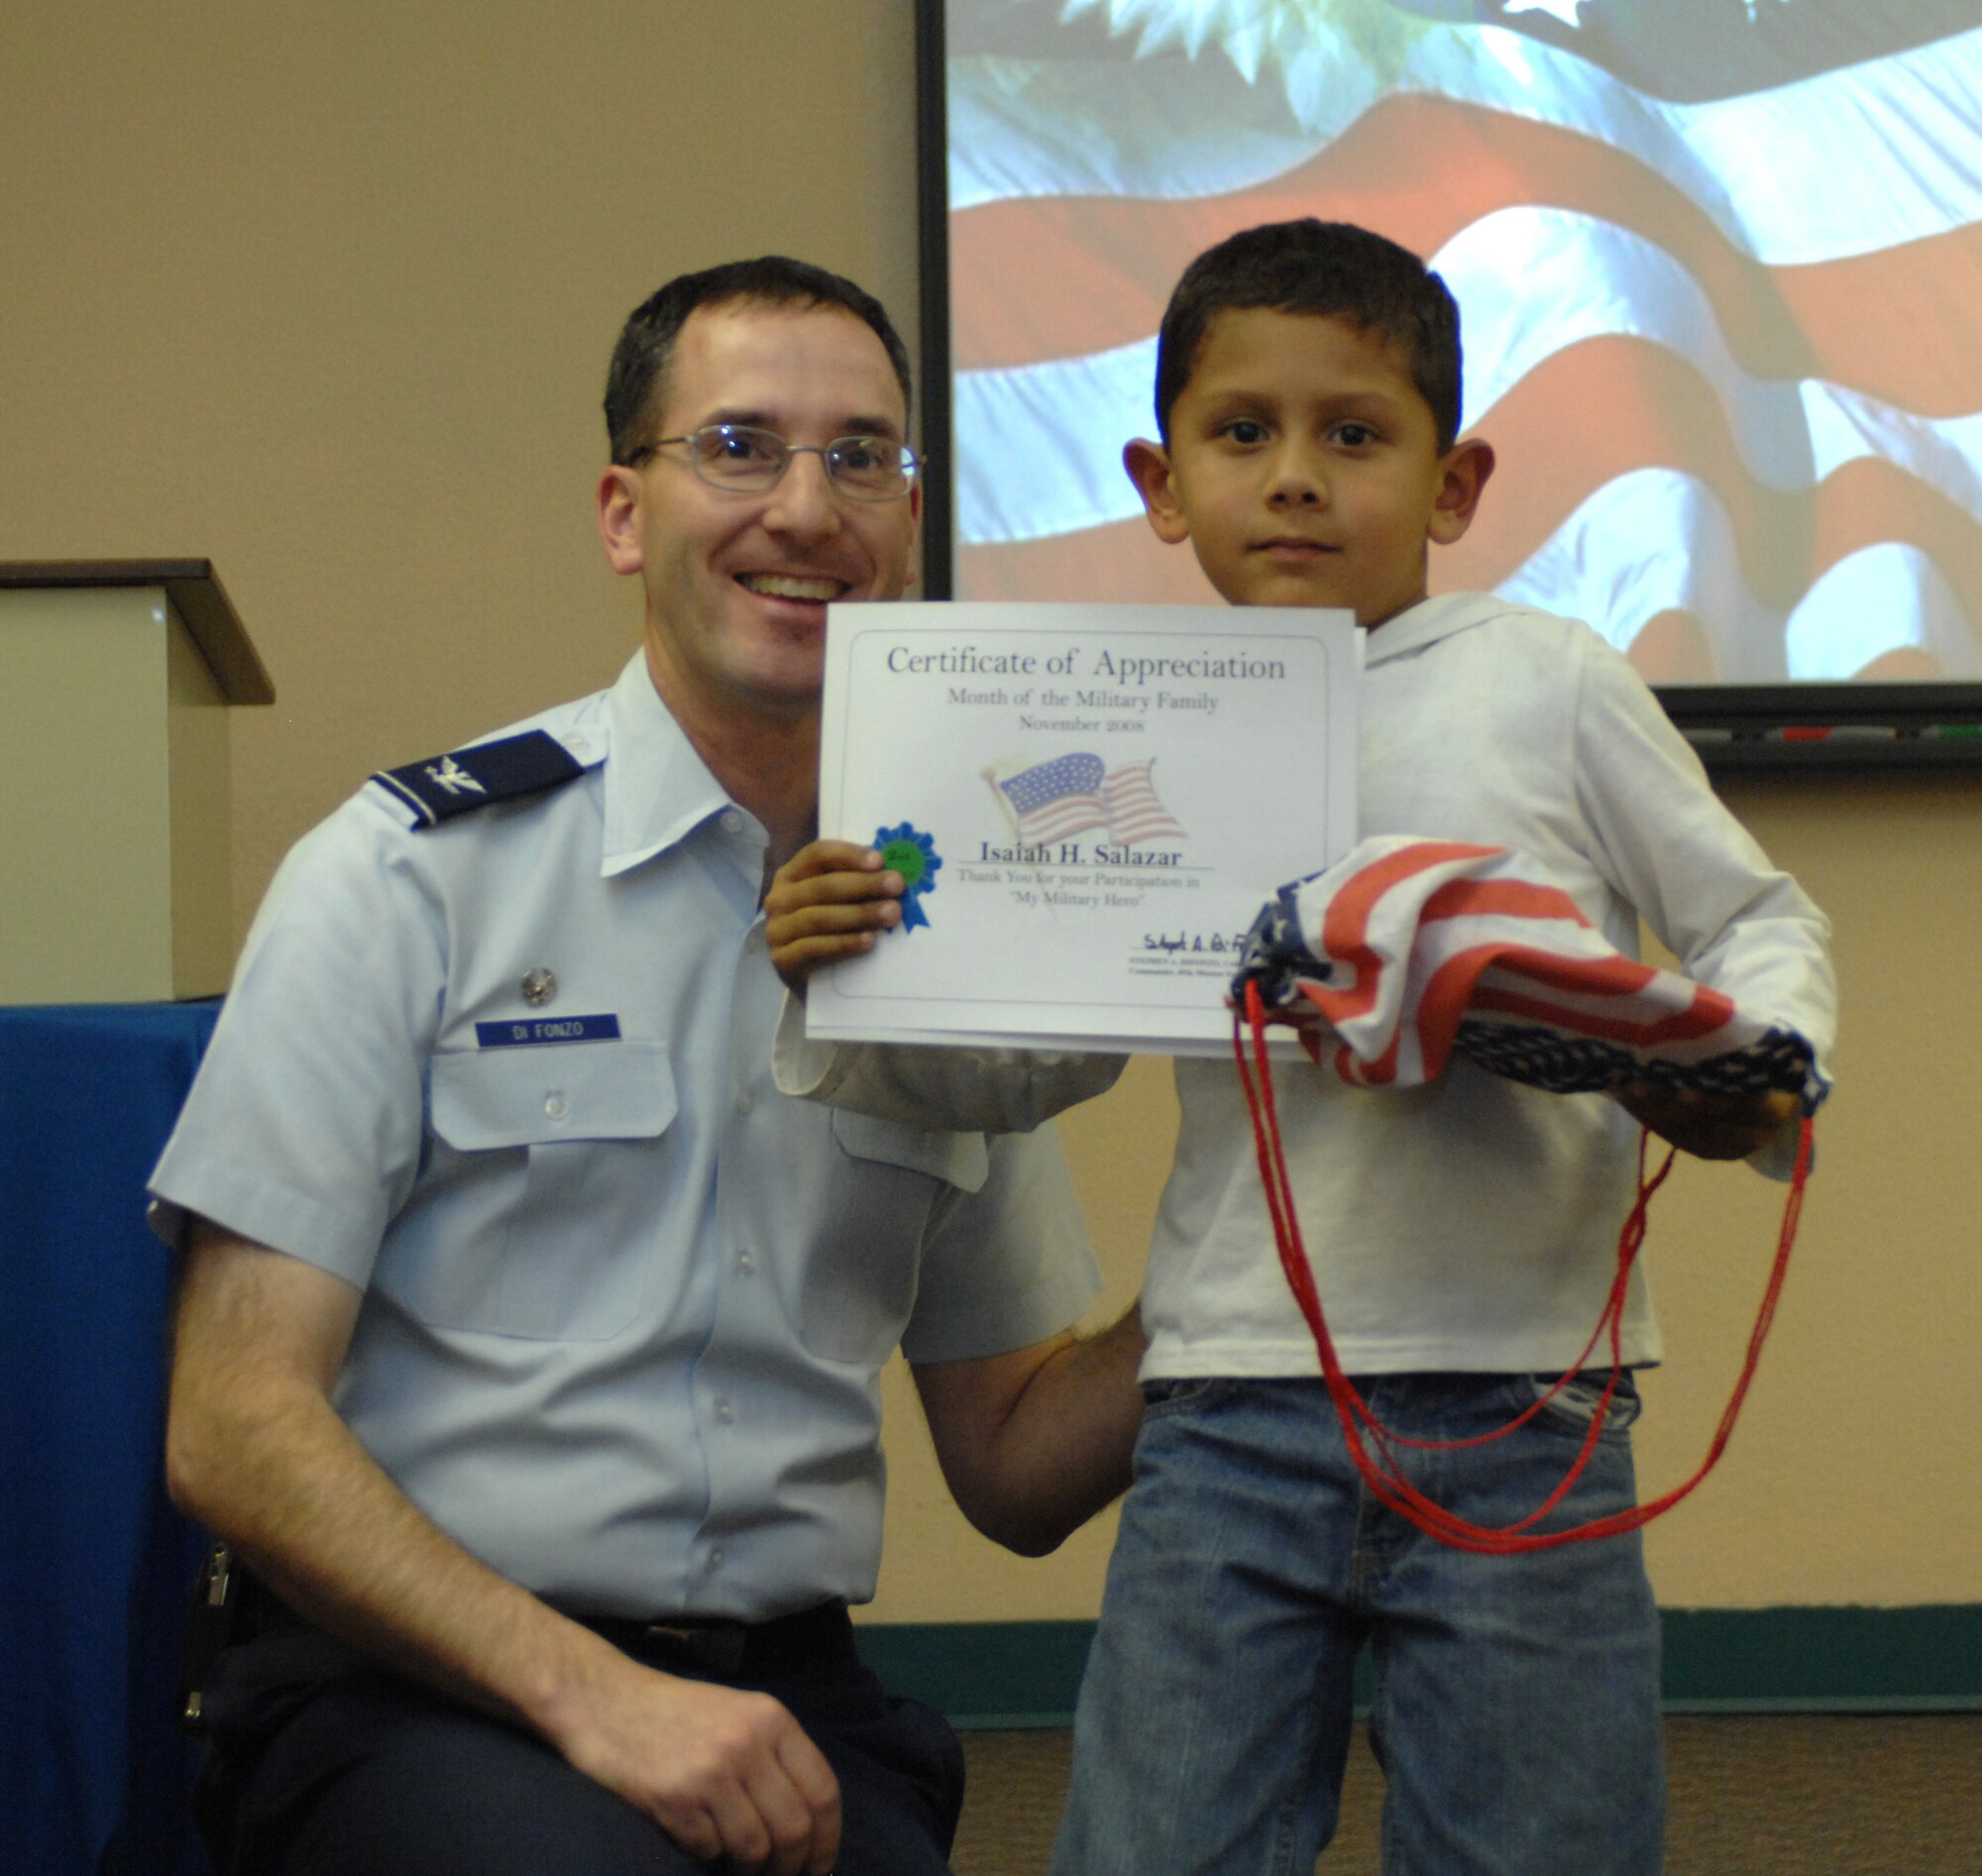 Col. Stephen DiFonzo, 49th Mission Support Group commander, presents an award to Isaiah Salazar for winning 2nd place in the 6 and under category of the drawing contest at the Airman and Family Readiness Center at Holloman Air Force Base, N.M., Nov. 24. The theme for the drawing contest was "My Military Hero" in support of Military Family Appreciation Month. (U.S. Air Force photo/Airman Sondra M. Escutia)